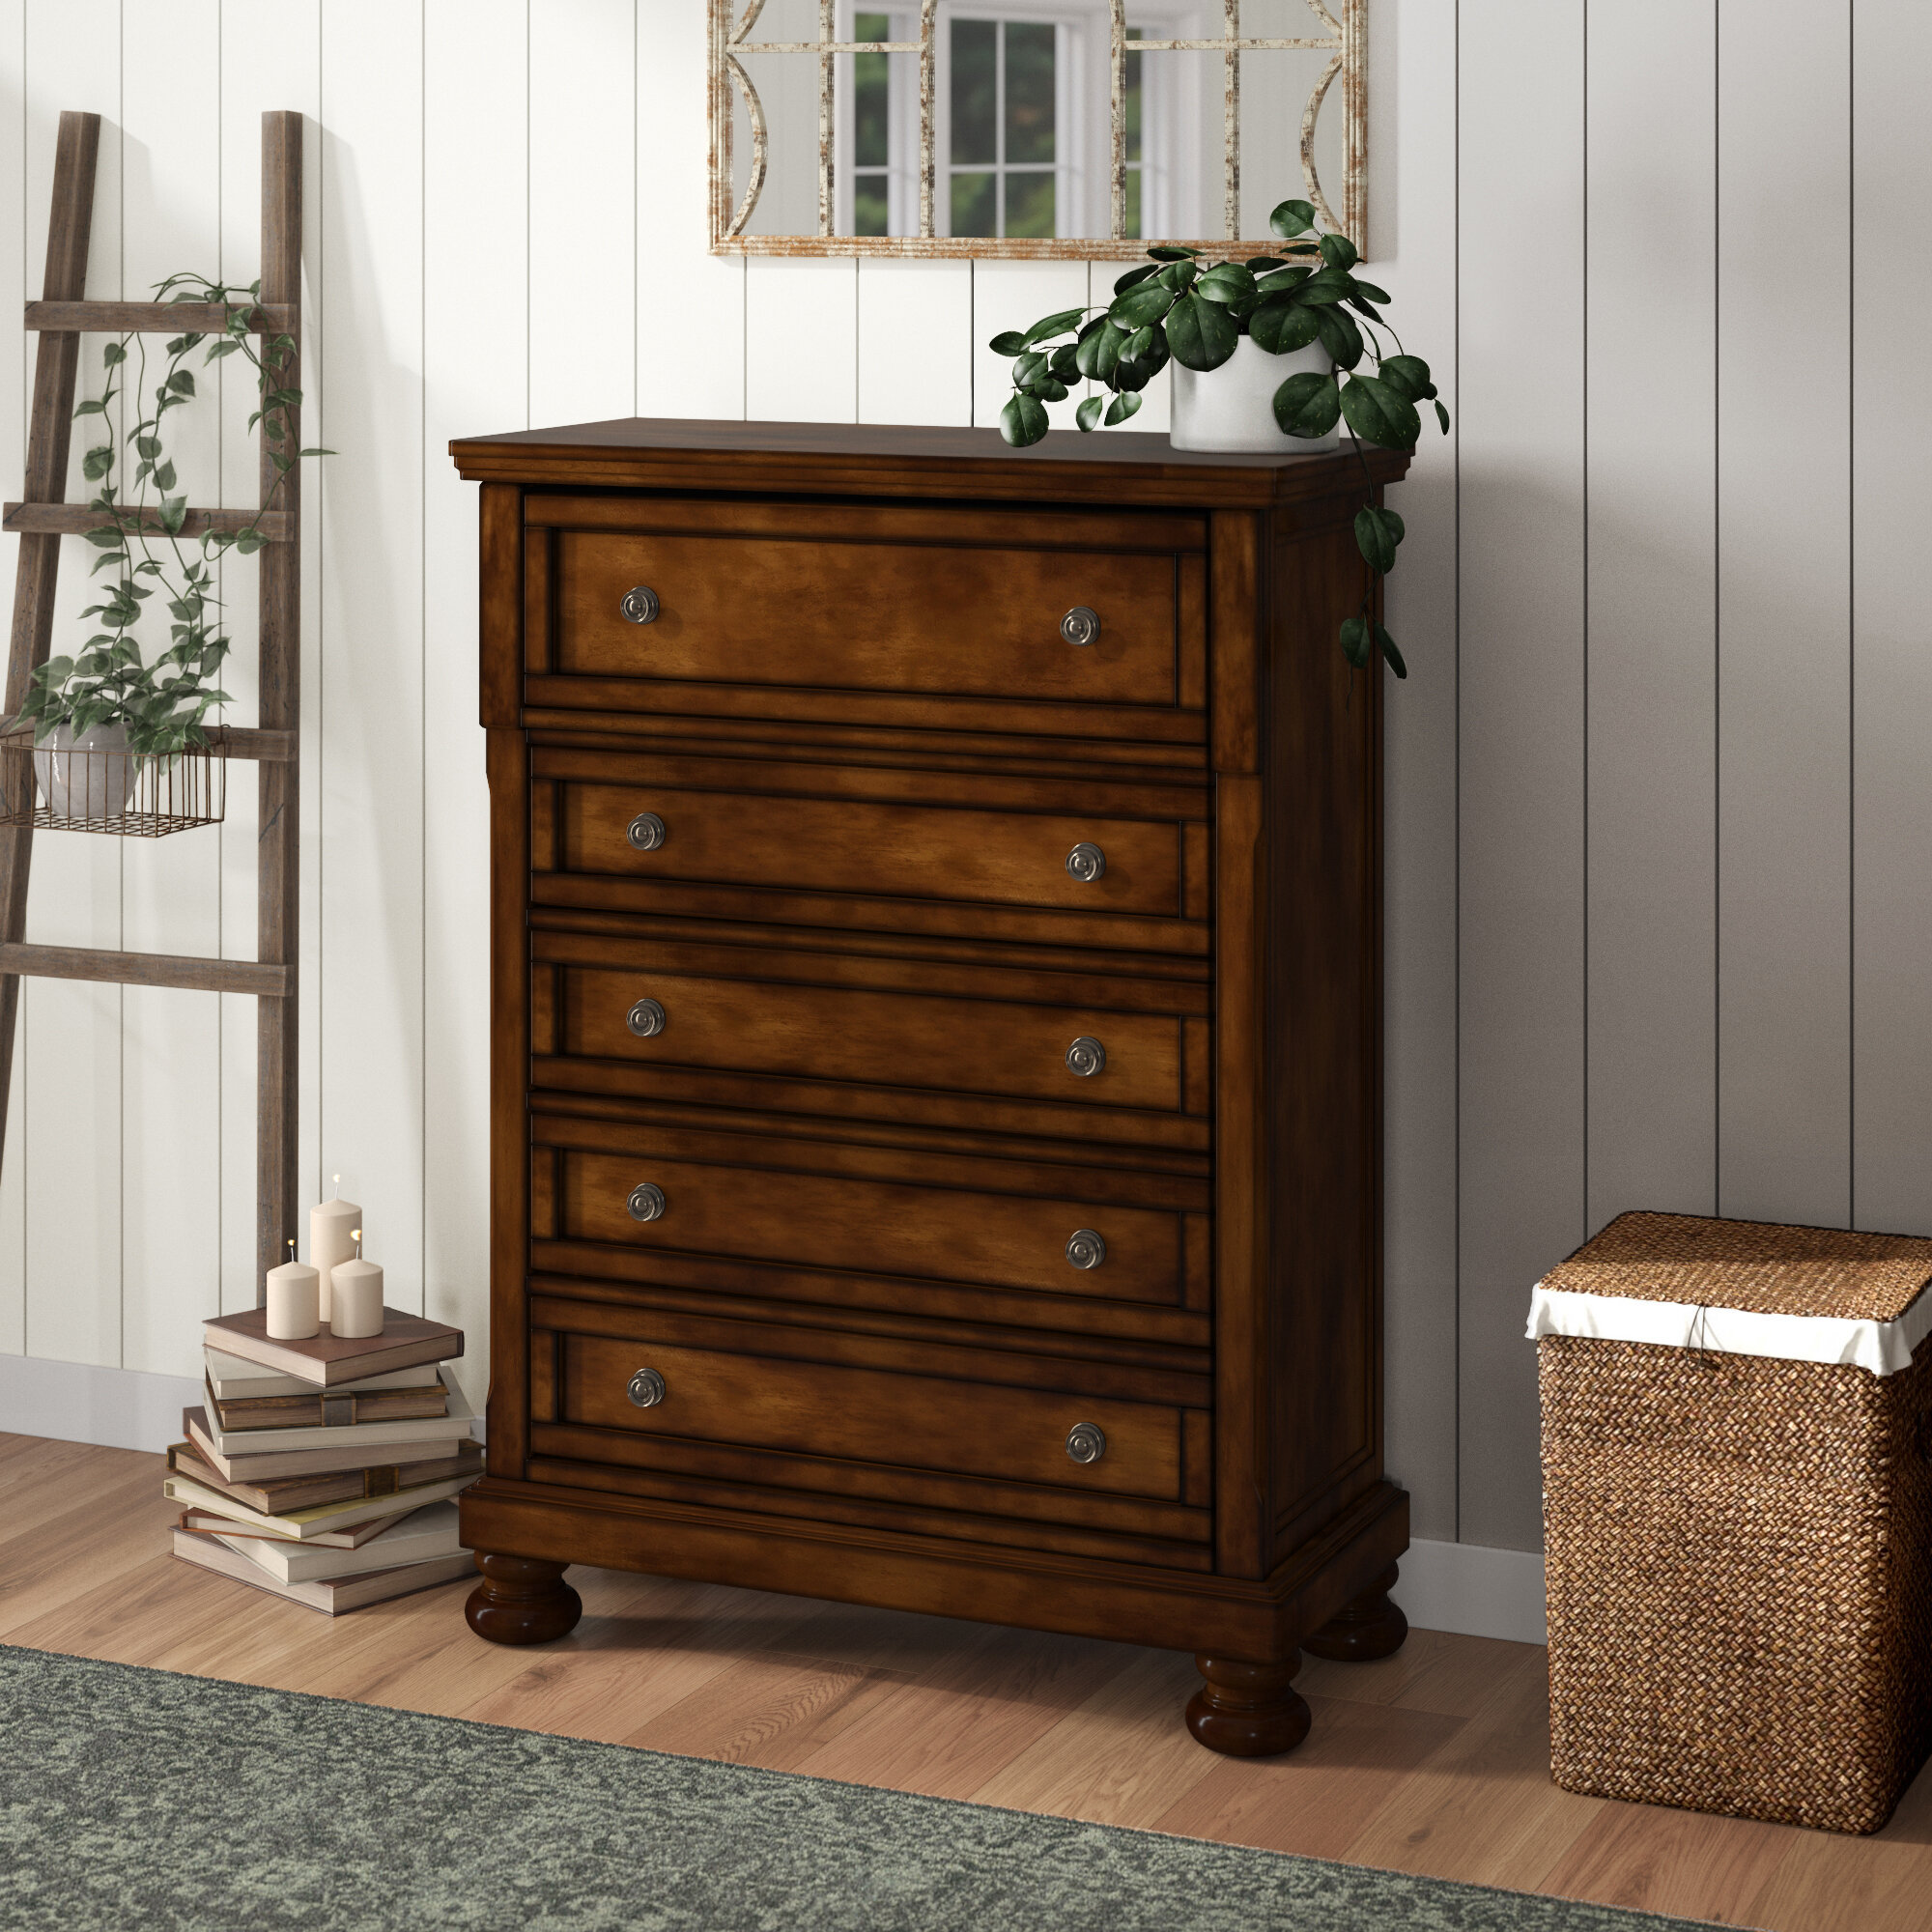 Details about   Chest of Drawers Tall Wooden Bedroom Dresser Modern Tallboy With Locks Cherry 